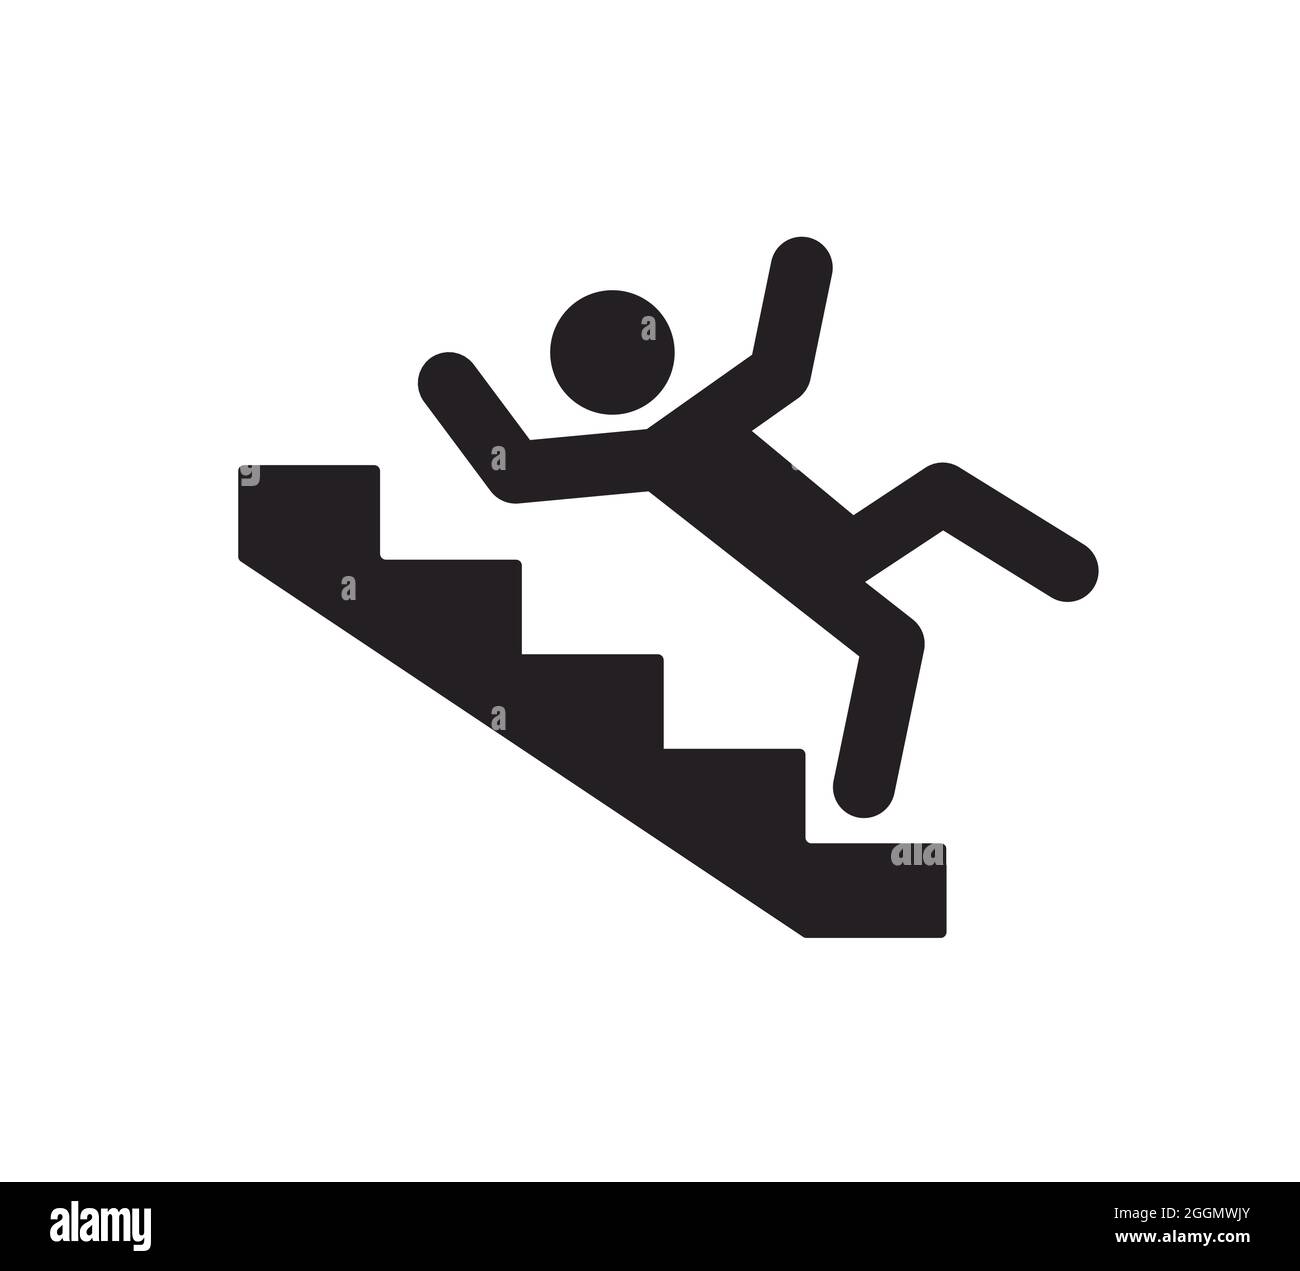 Man On Stair Near To Fall Down Stock Photo, Picture and Royalty Free Image.  Image 17541996.